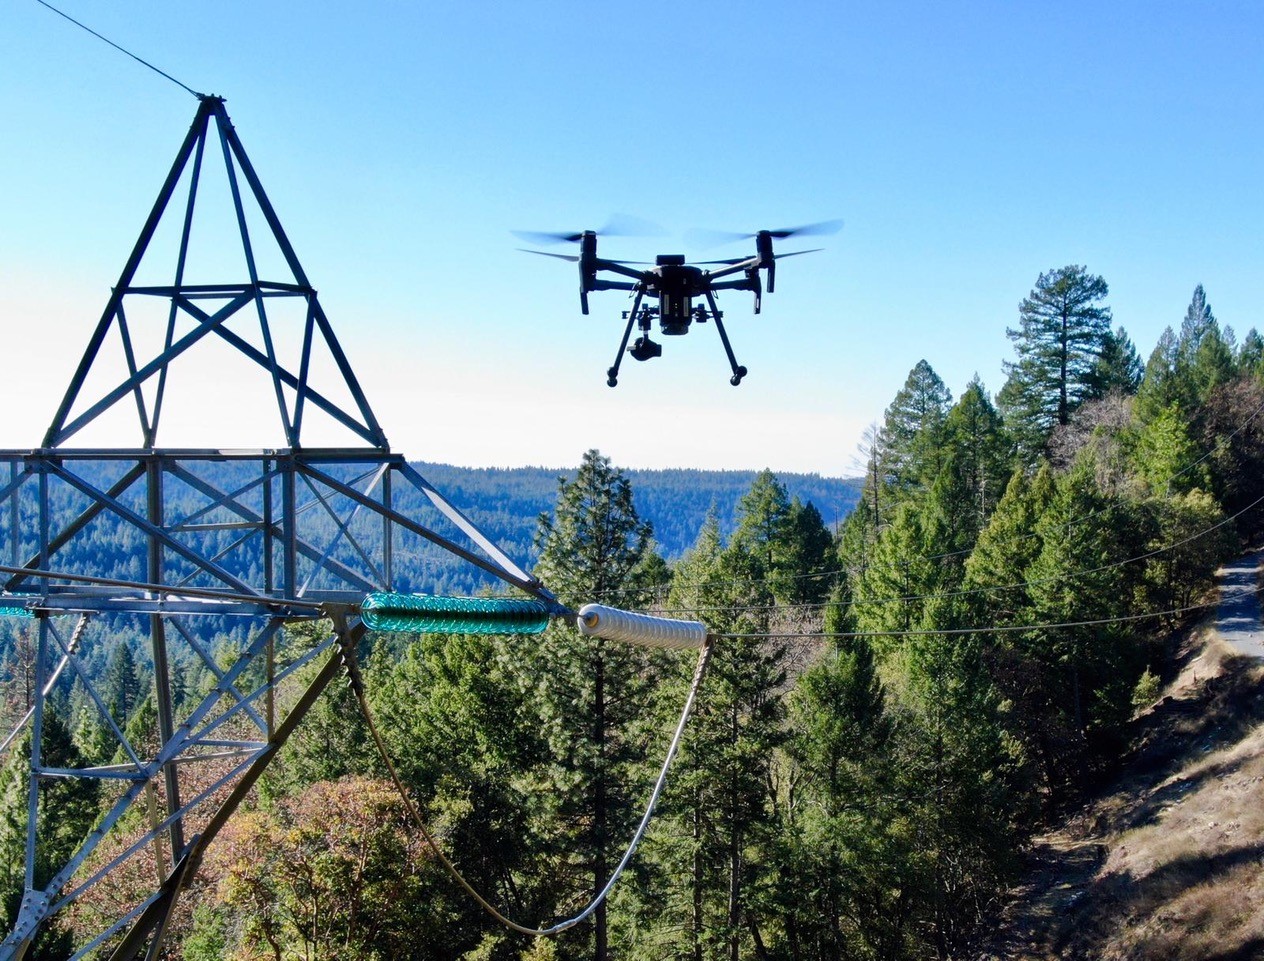 Drone Technology to Assess Equipment in High Fire Risk Areas